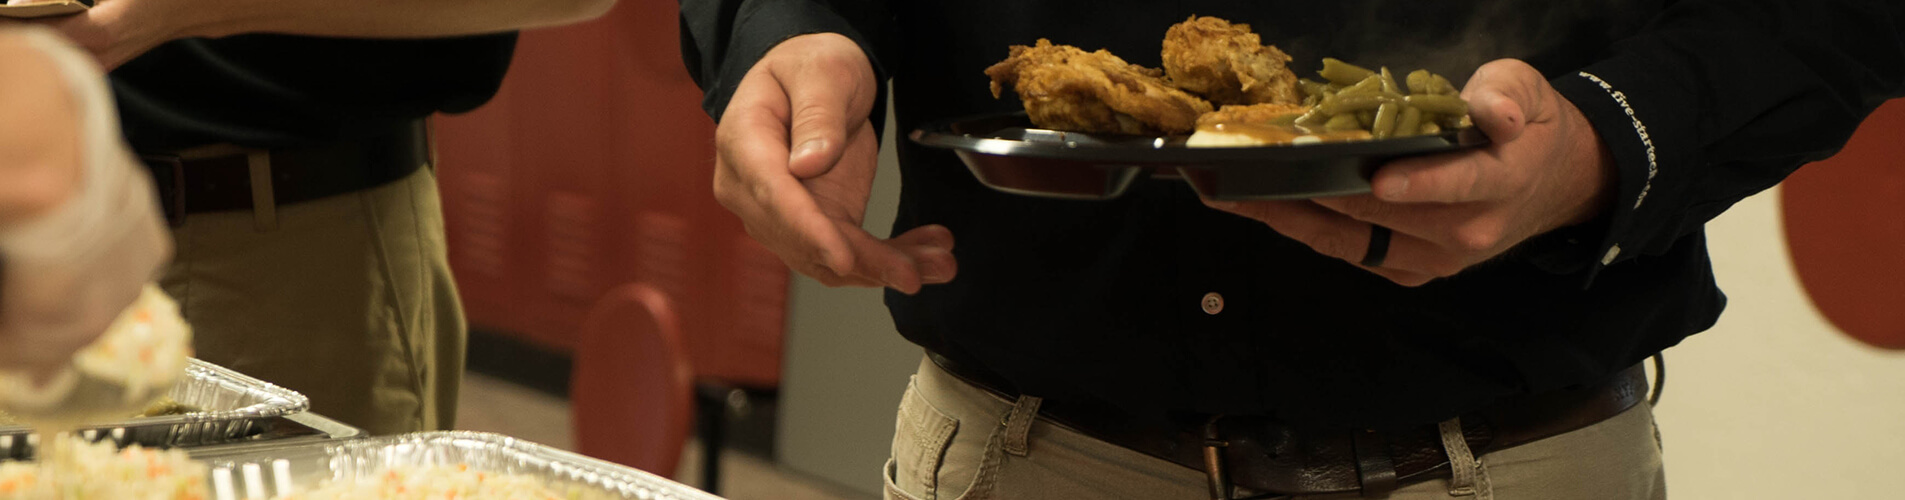 Person picking up a a plate of fried chicken